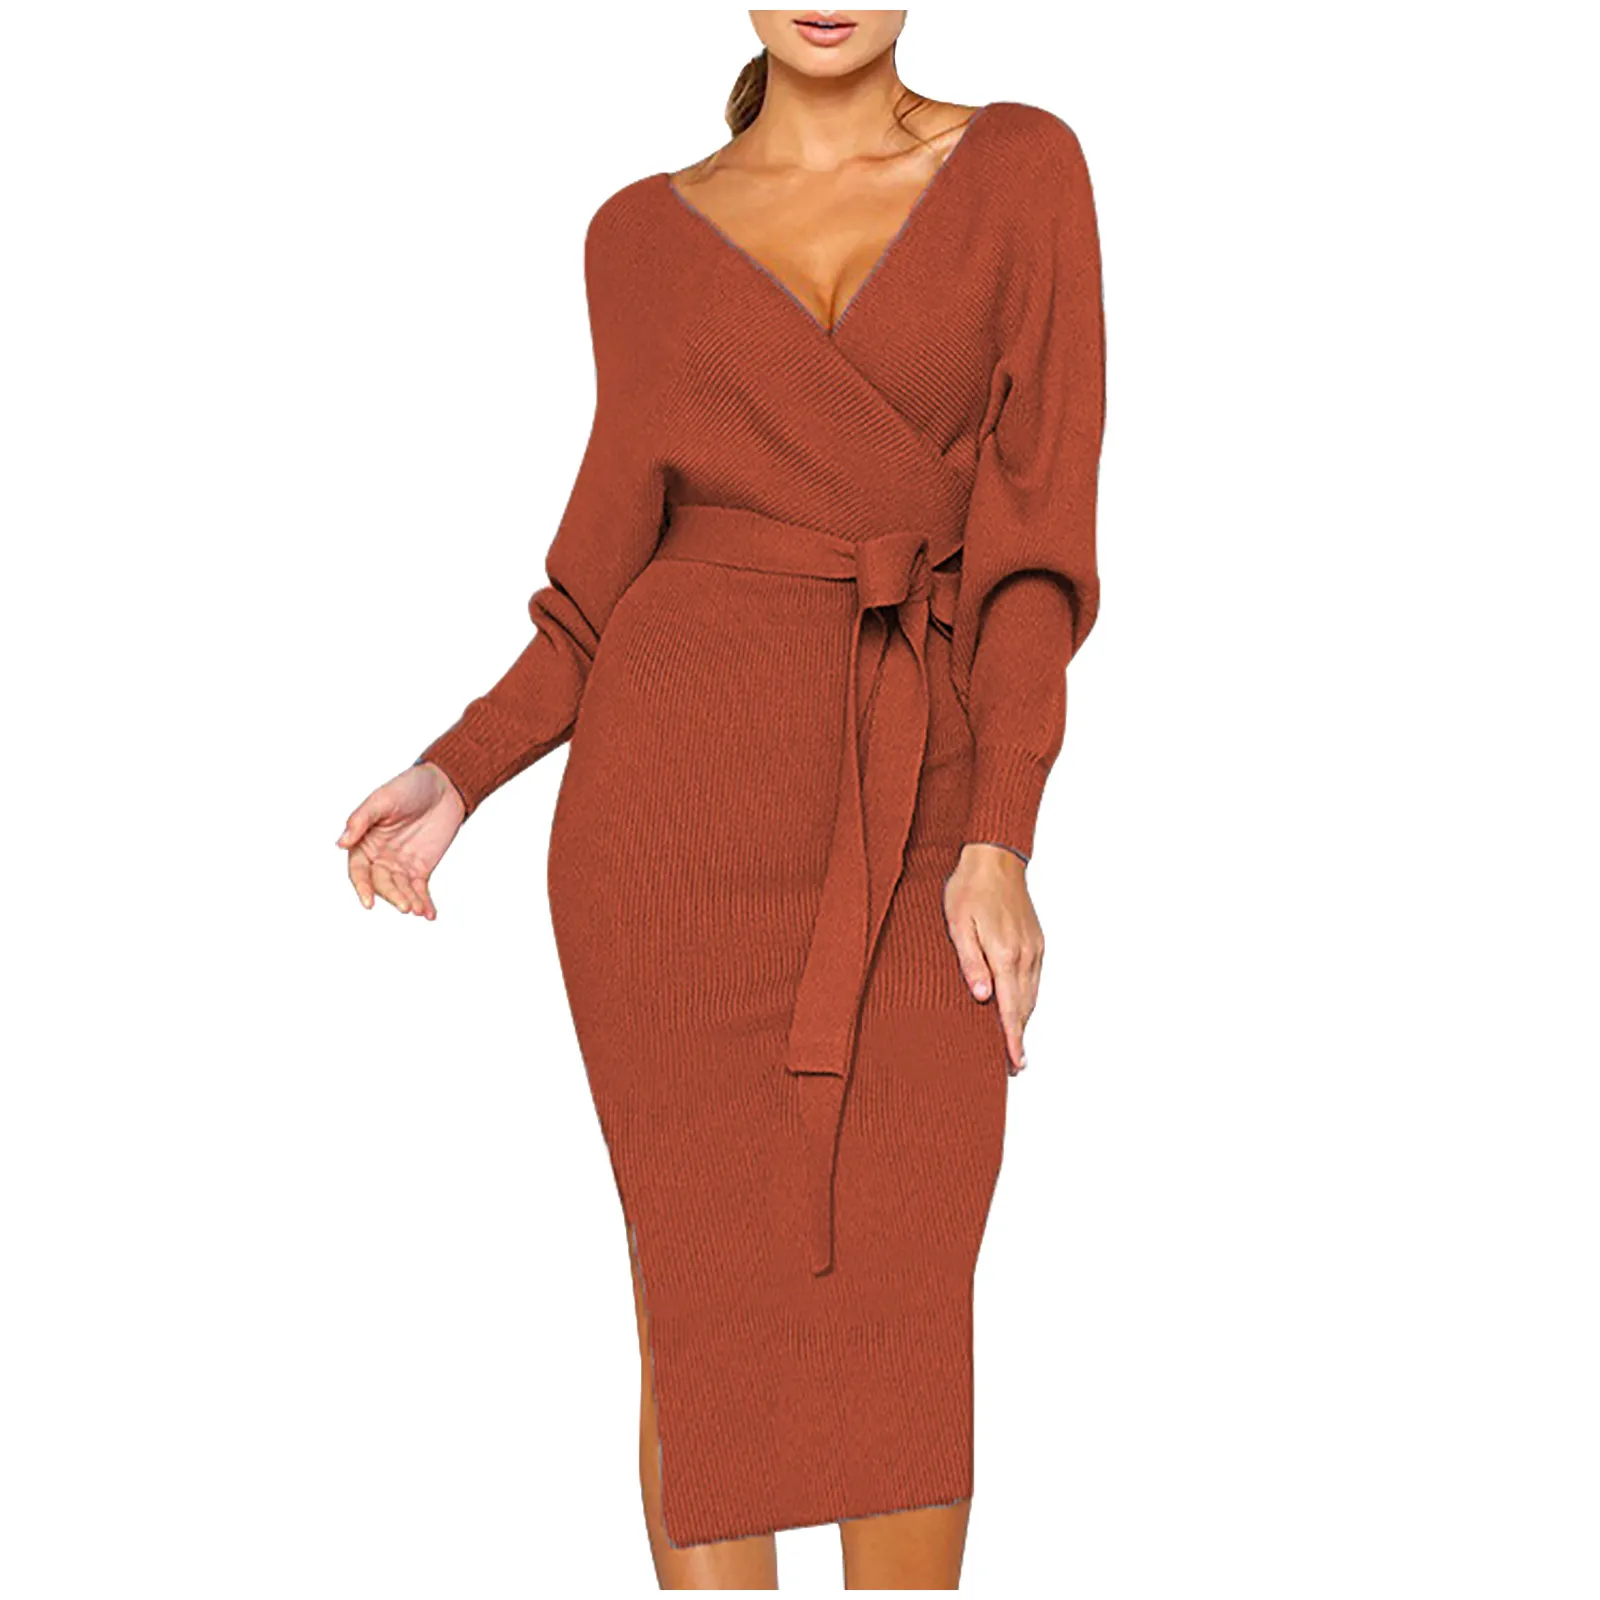 

2021 Women's Fashion Knitted Long Sleeve V-Neck Sexy Hip Wrap Warm Long Dress Casual Ethnic Holiday Style Refreshing Stmosphere